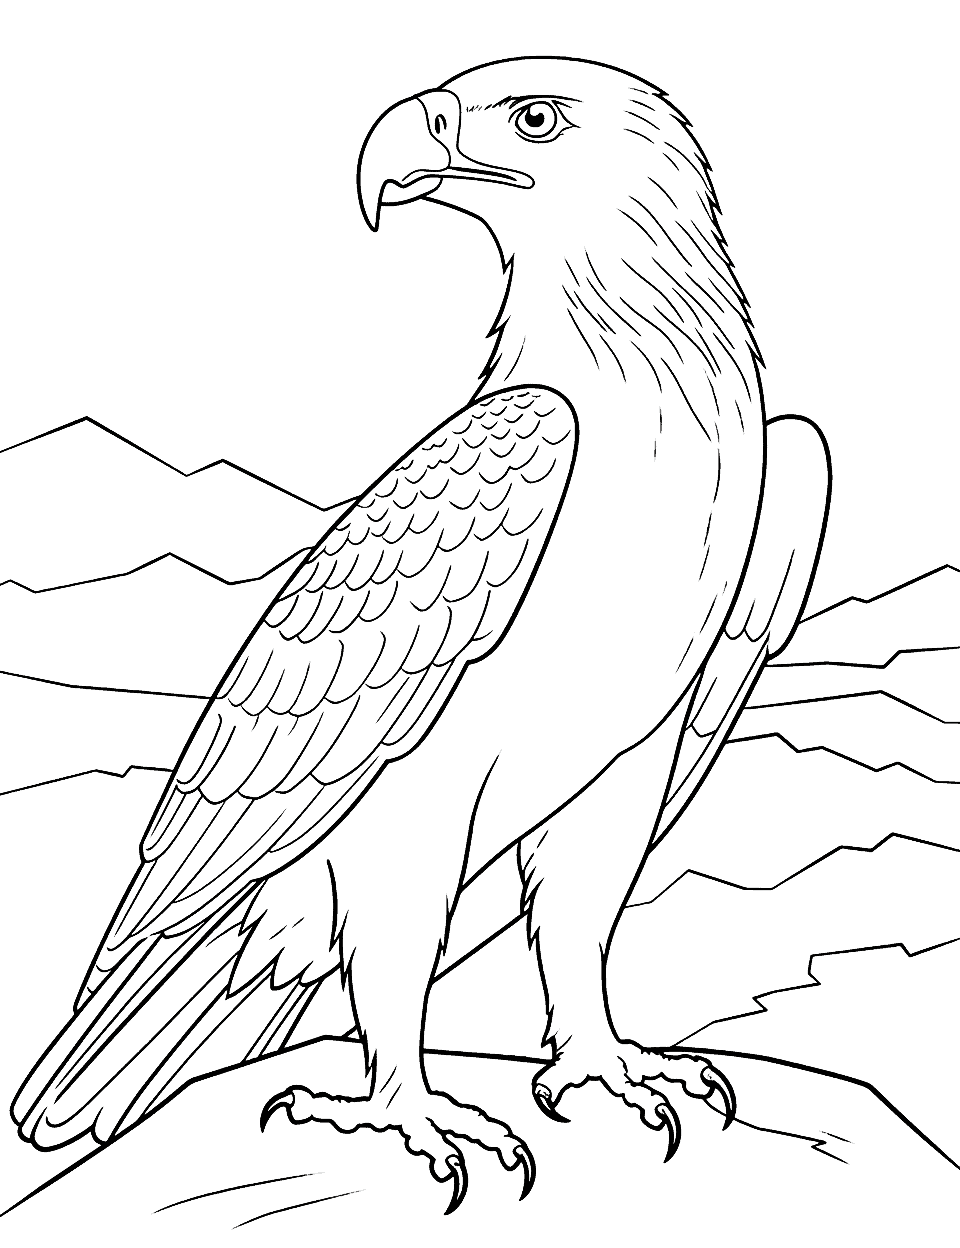 Wise Eagle Animal Coloring Page - An eagle perched on a rocky cliff, observing the vast landscape.